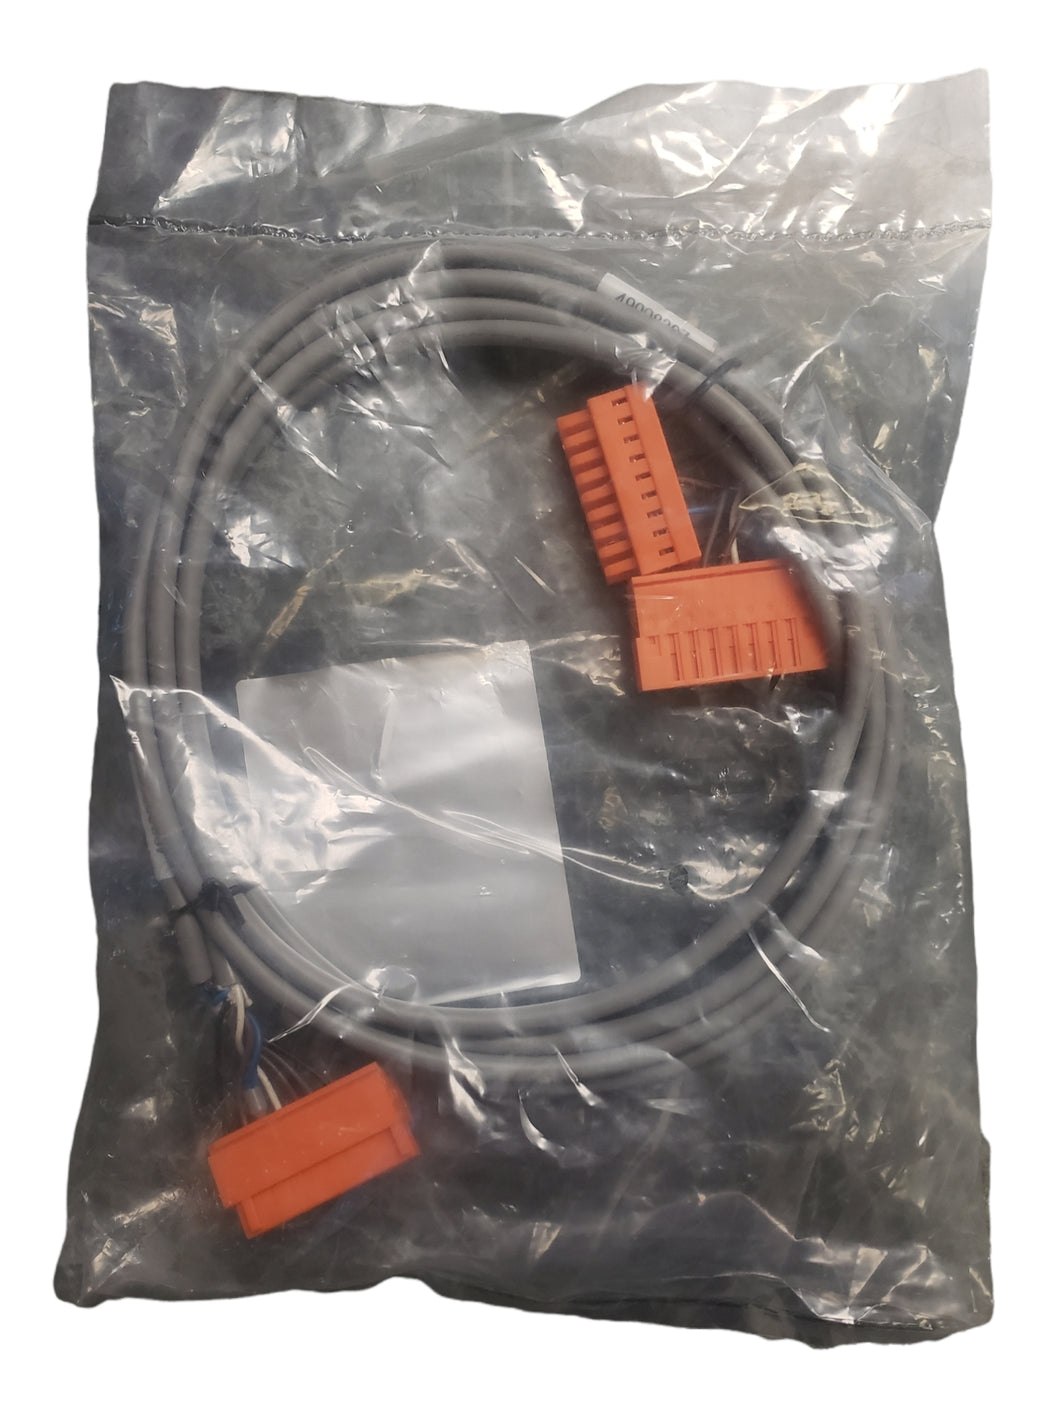 PowerSonic Cordset 49008307 9PIN Female To 9PIN Female+Male Unshielded - NEW IN ORIGINAL PACKAGING - FreemanLiquidators - [product_description]